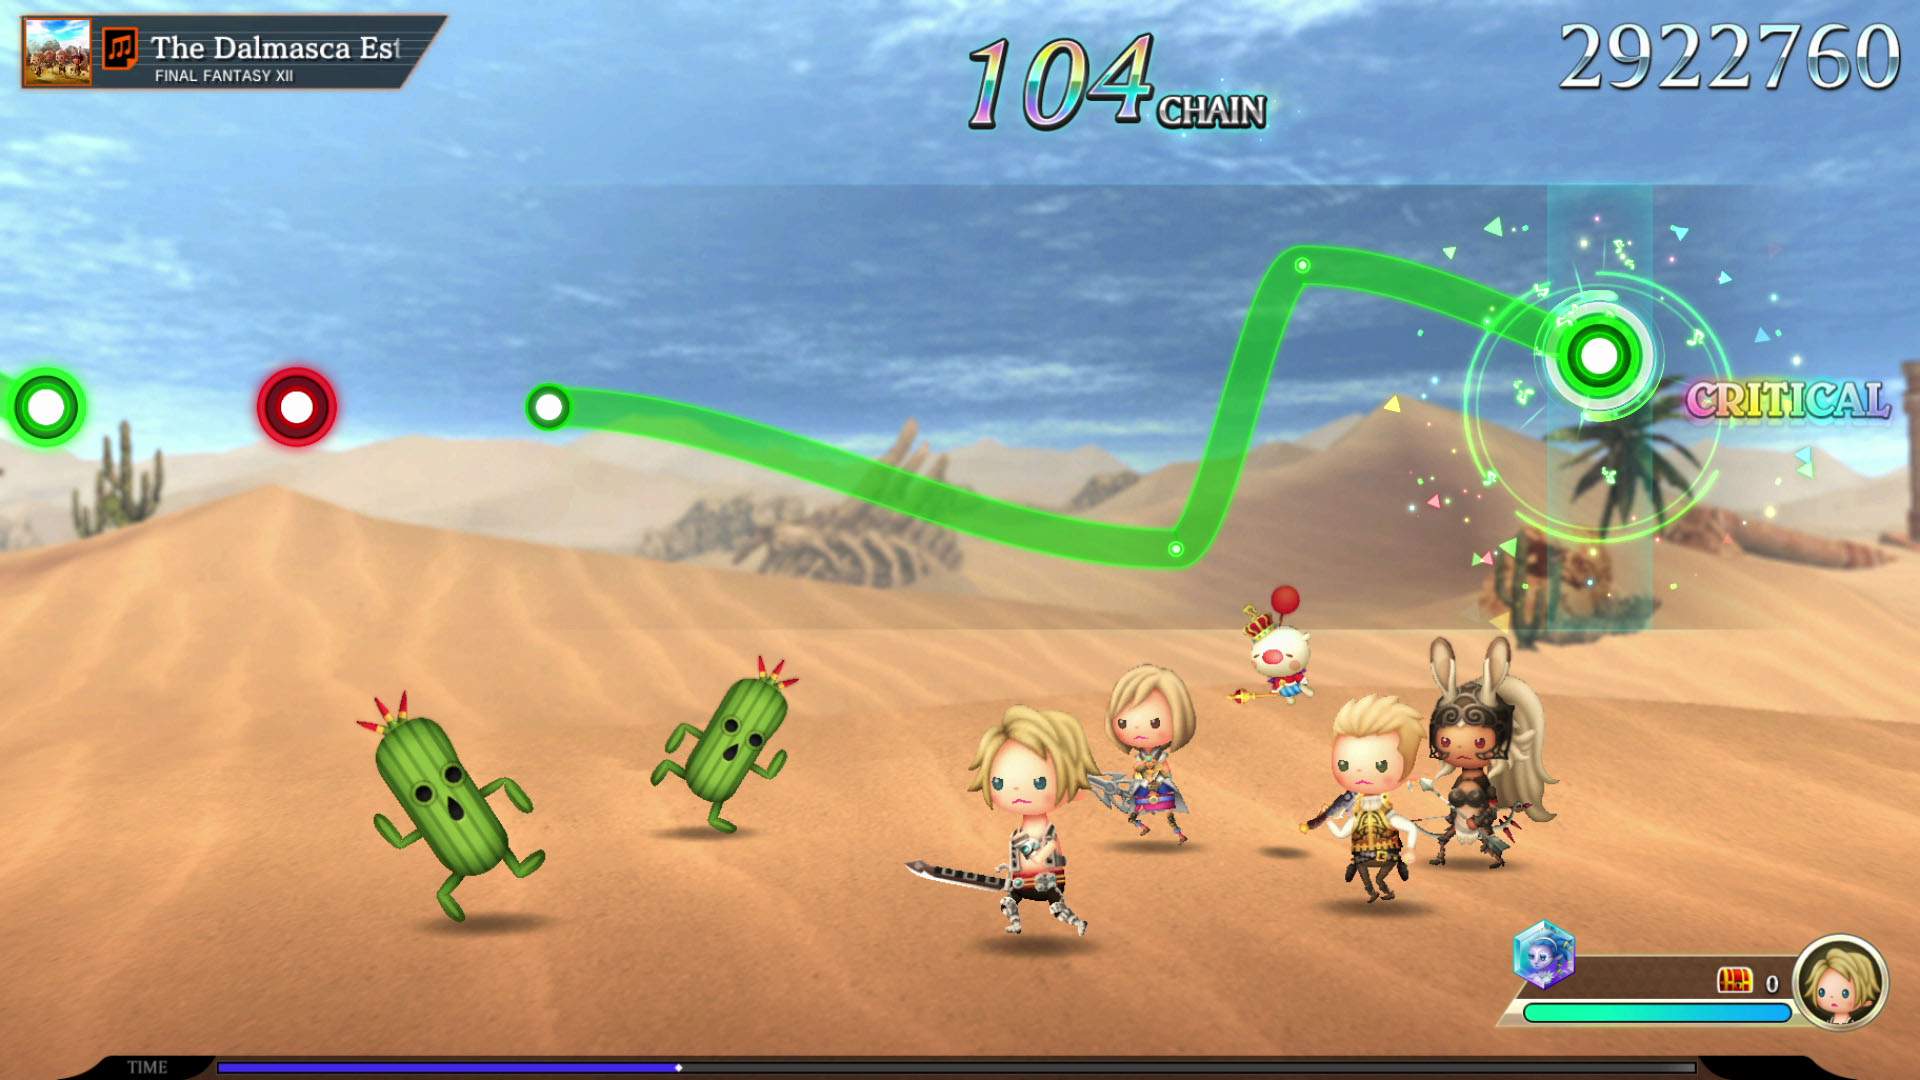 Final fantasy characters and cactuars battle in the desert with music from FINAL FANTASY 12